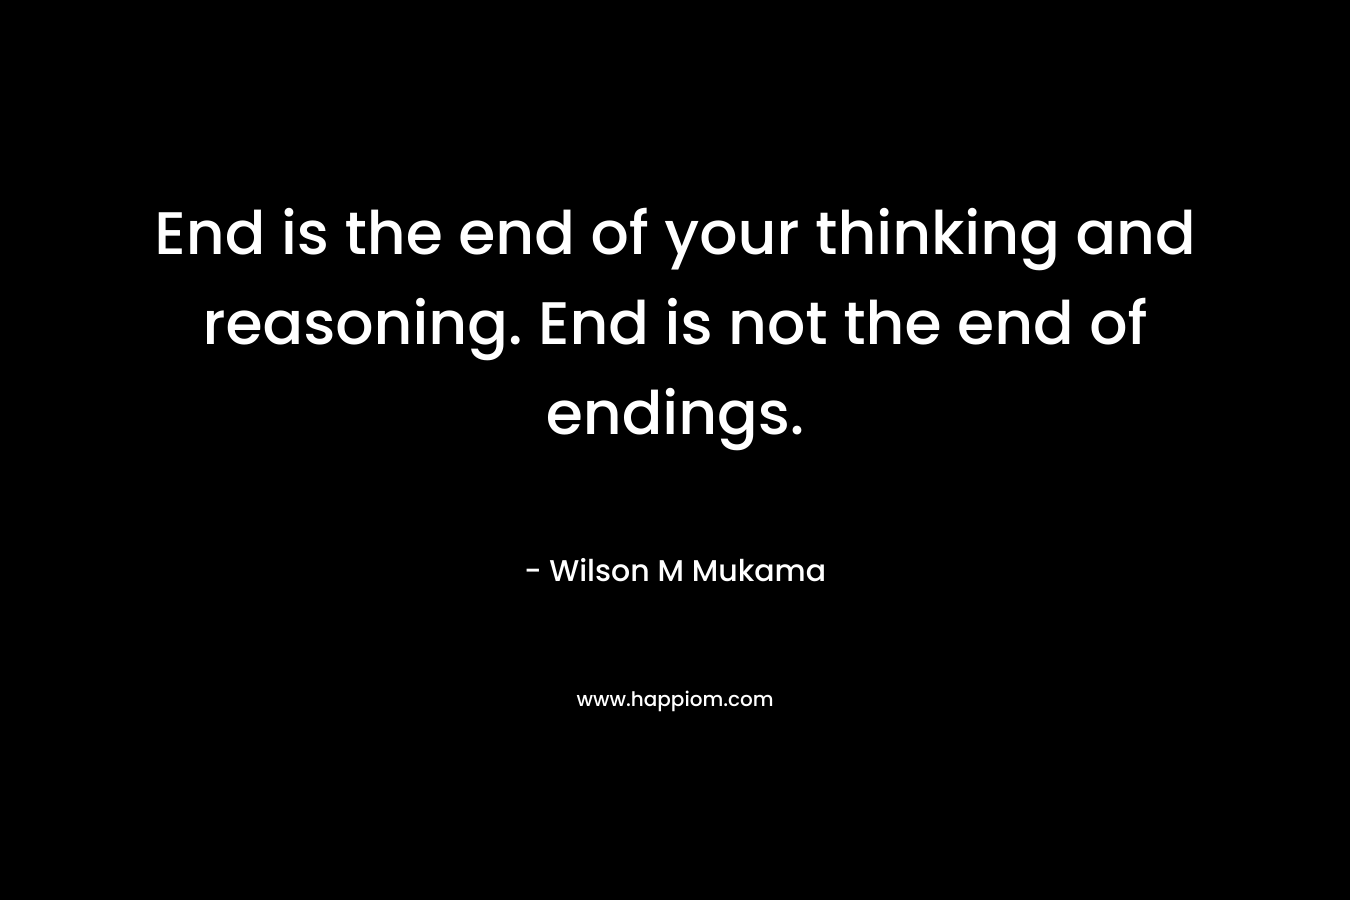 End is the end of your thinking and reasoning. End is not the end of endings. – Wilson M Mukama